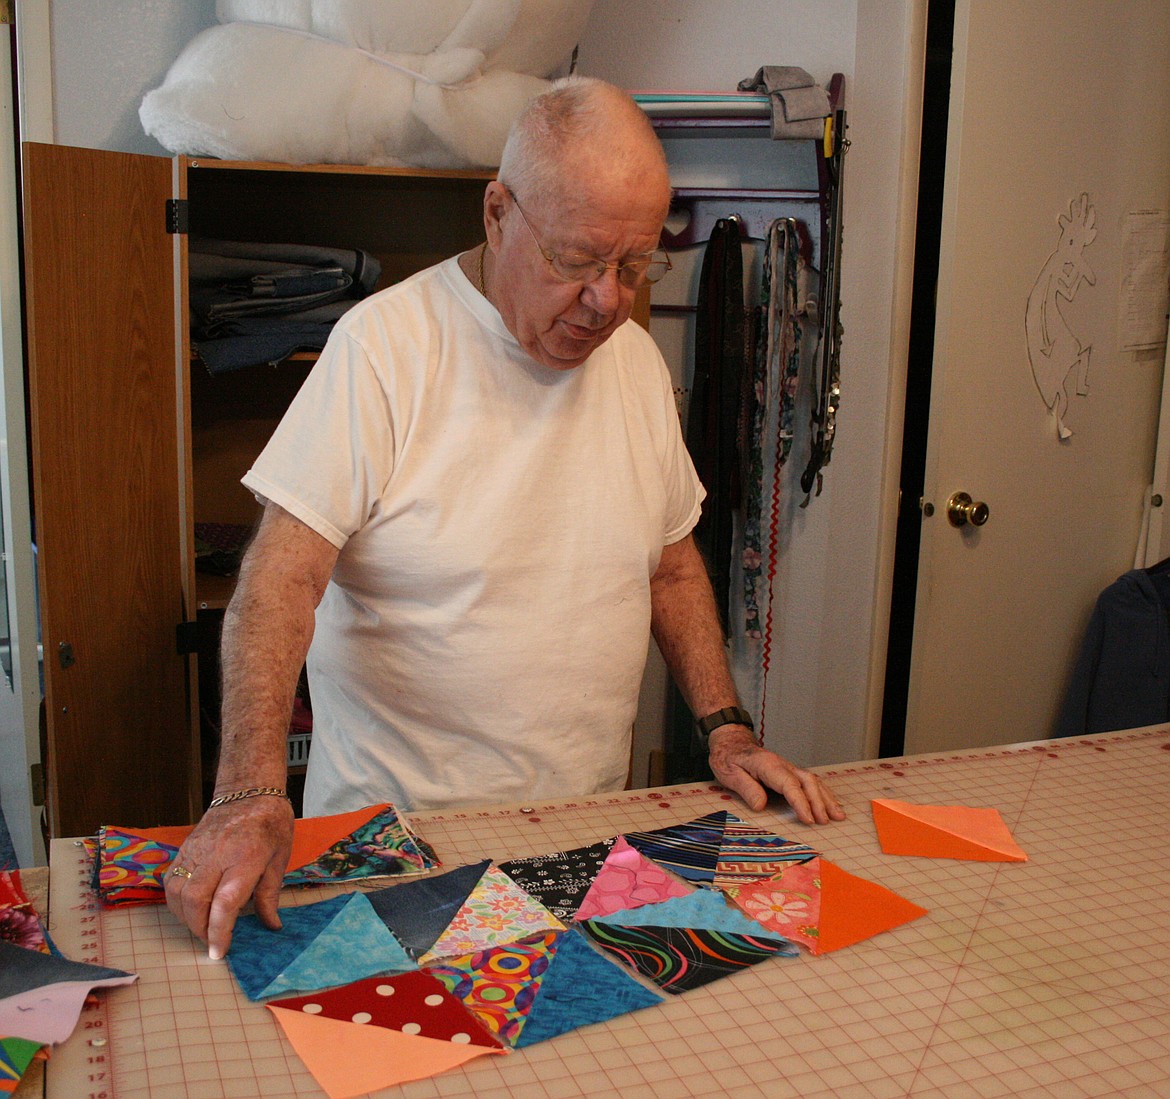 Mel Neal rearranges quilt blocks for the most eye-catching design. Neal and his wife Max have made more than 800 quilts for donation to the Columbia Basin Cancer Foundation.